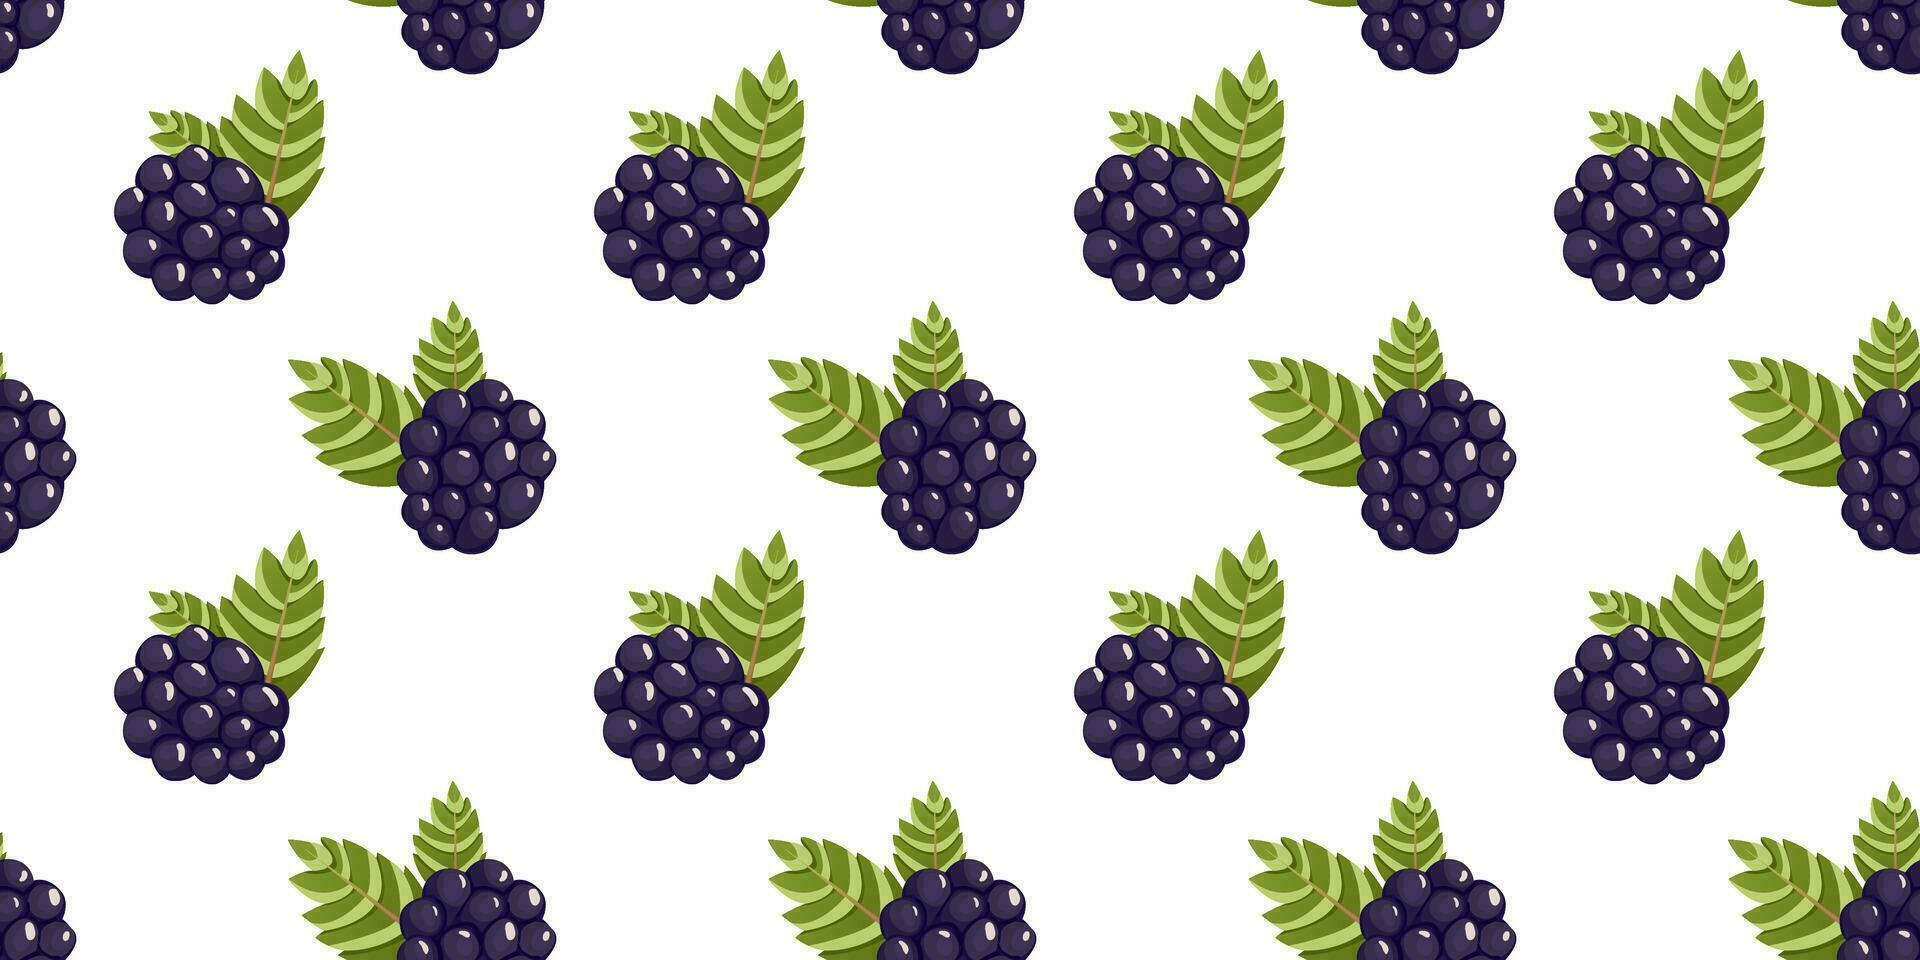 Blackberry seamless pattern. Vector. Can be used to create appealing and decorative designs for various products like wallpapers, fabric prints, packaging, or stationery with a fresh and summery vibe. vector